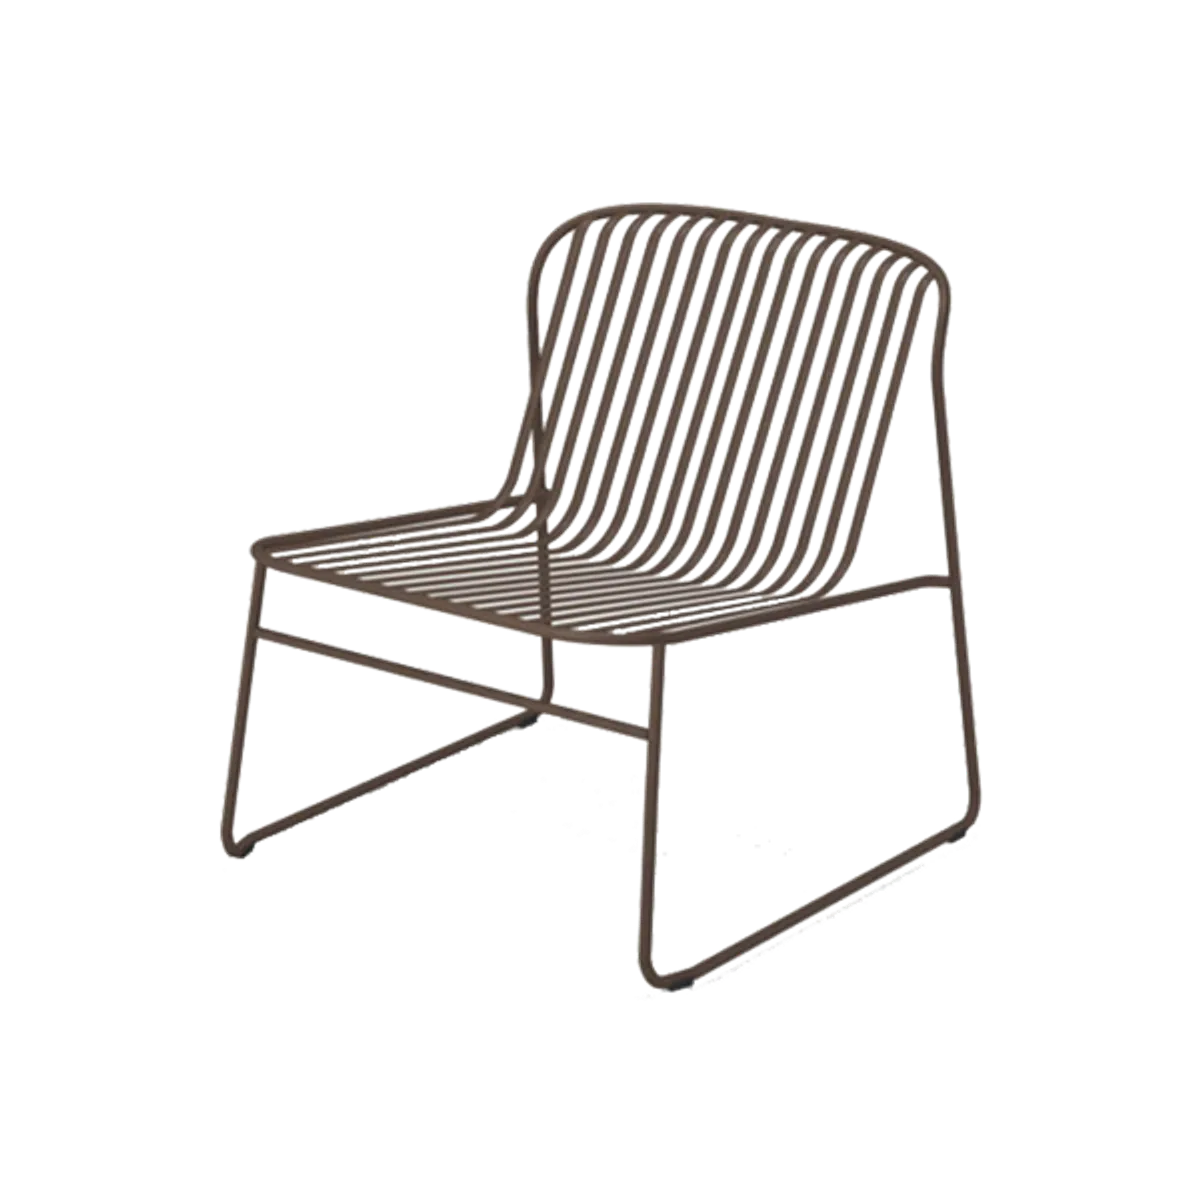 Web Riviera Lounge Chair For Outdoor Hospitality